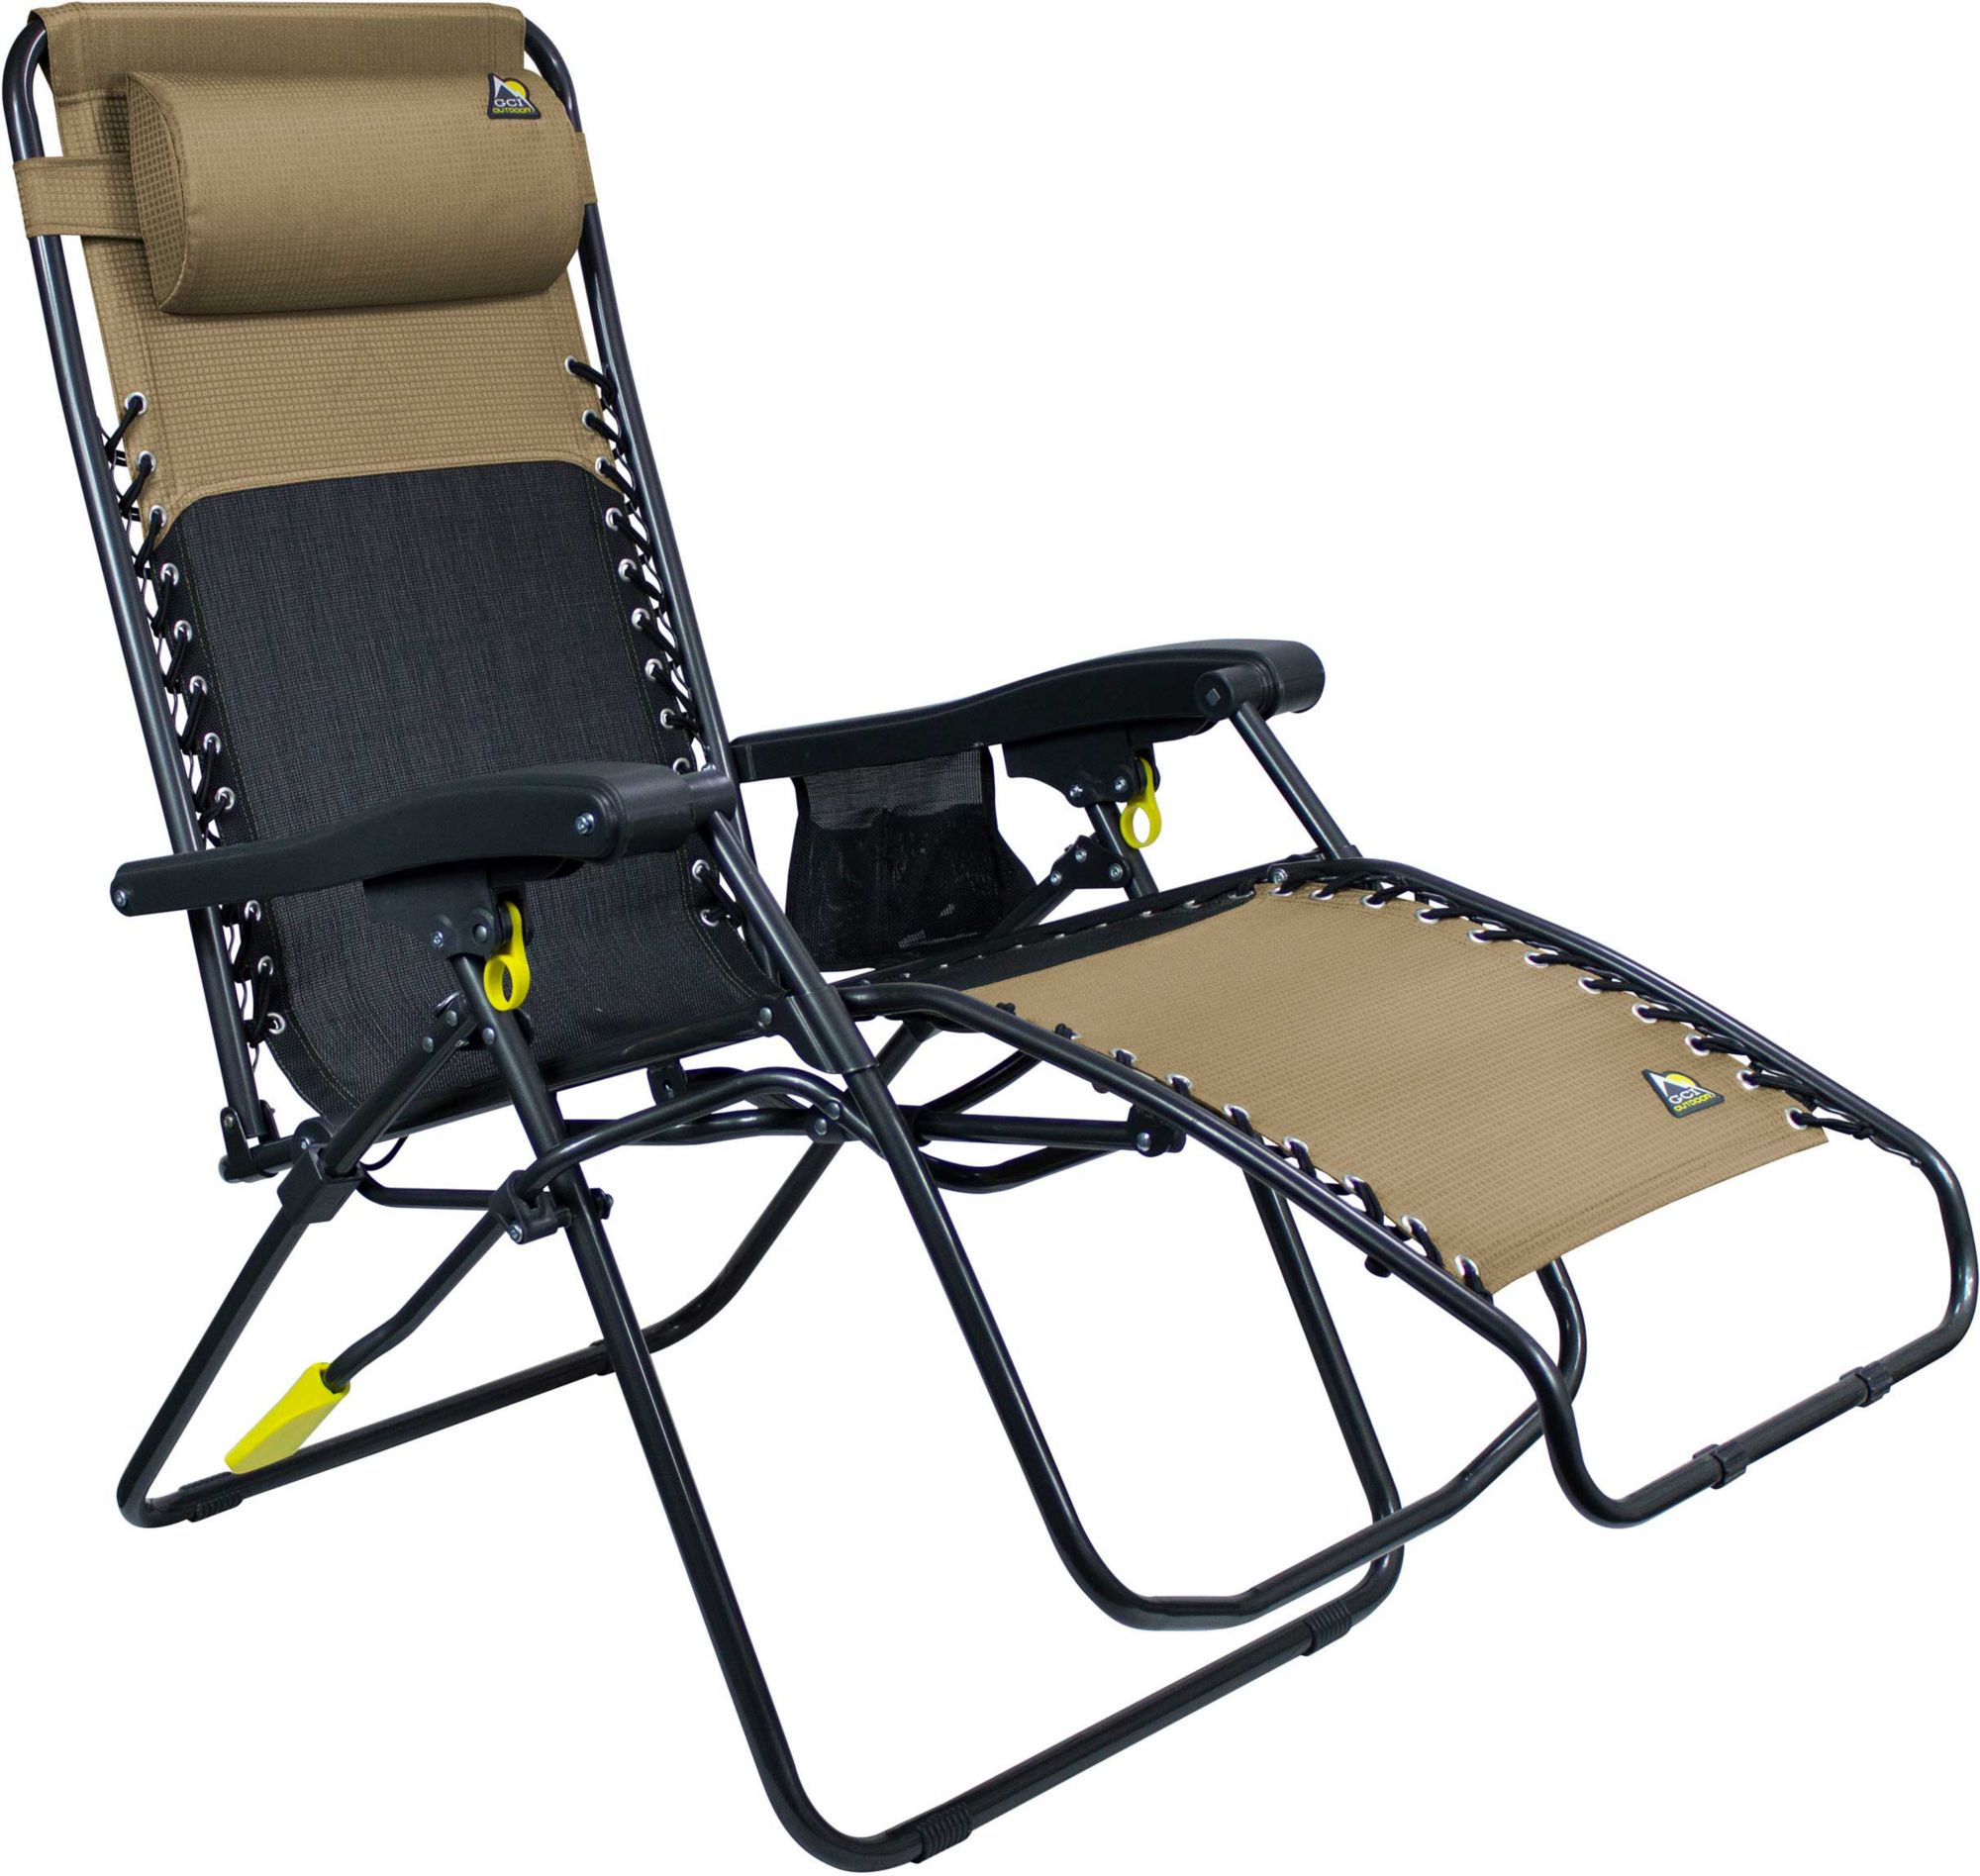 dick's sporting goods lawn chairs